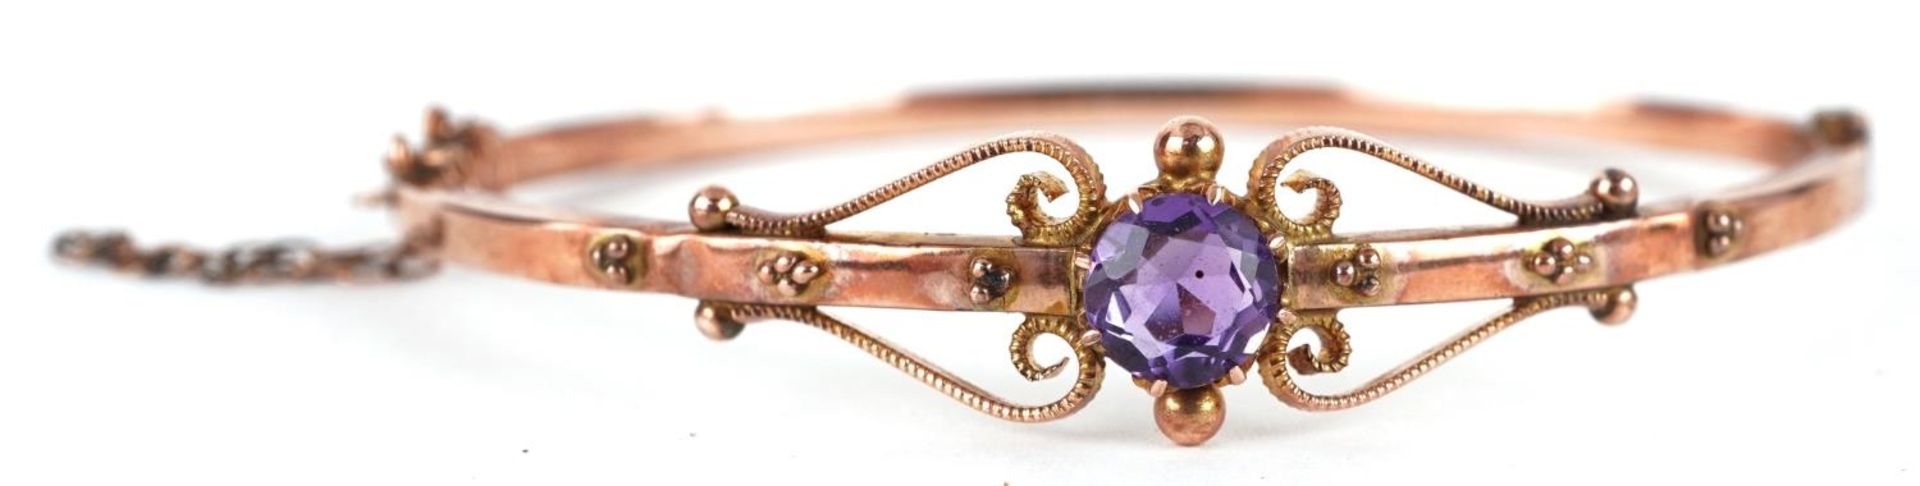 Edwardian 9ct rose gold amethyst bangle with scrolled decoration, the amethyst approximately 6.6mm